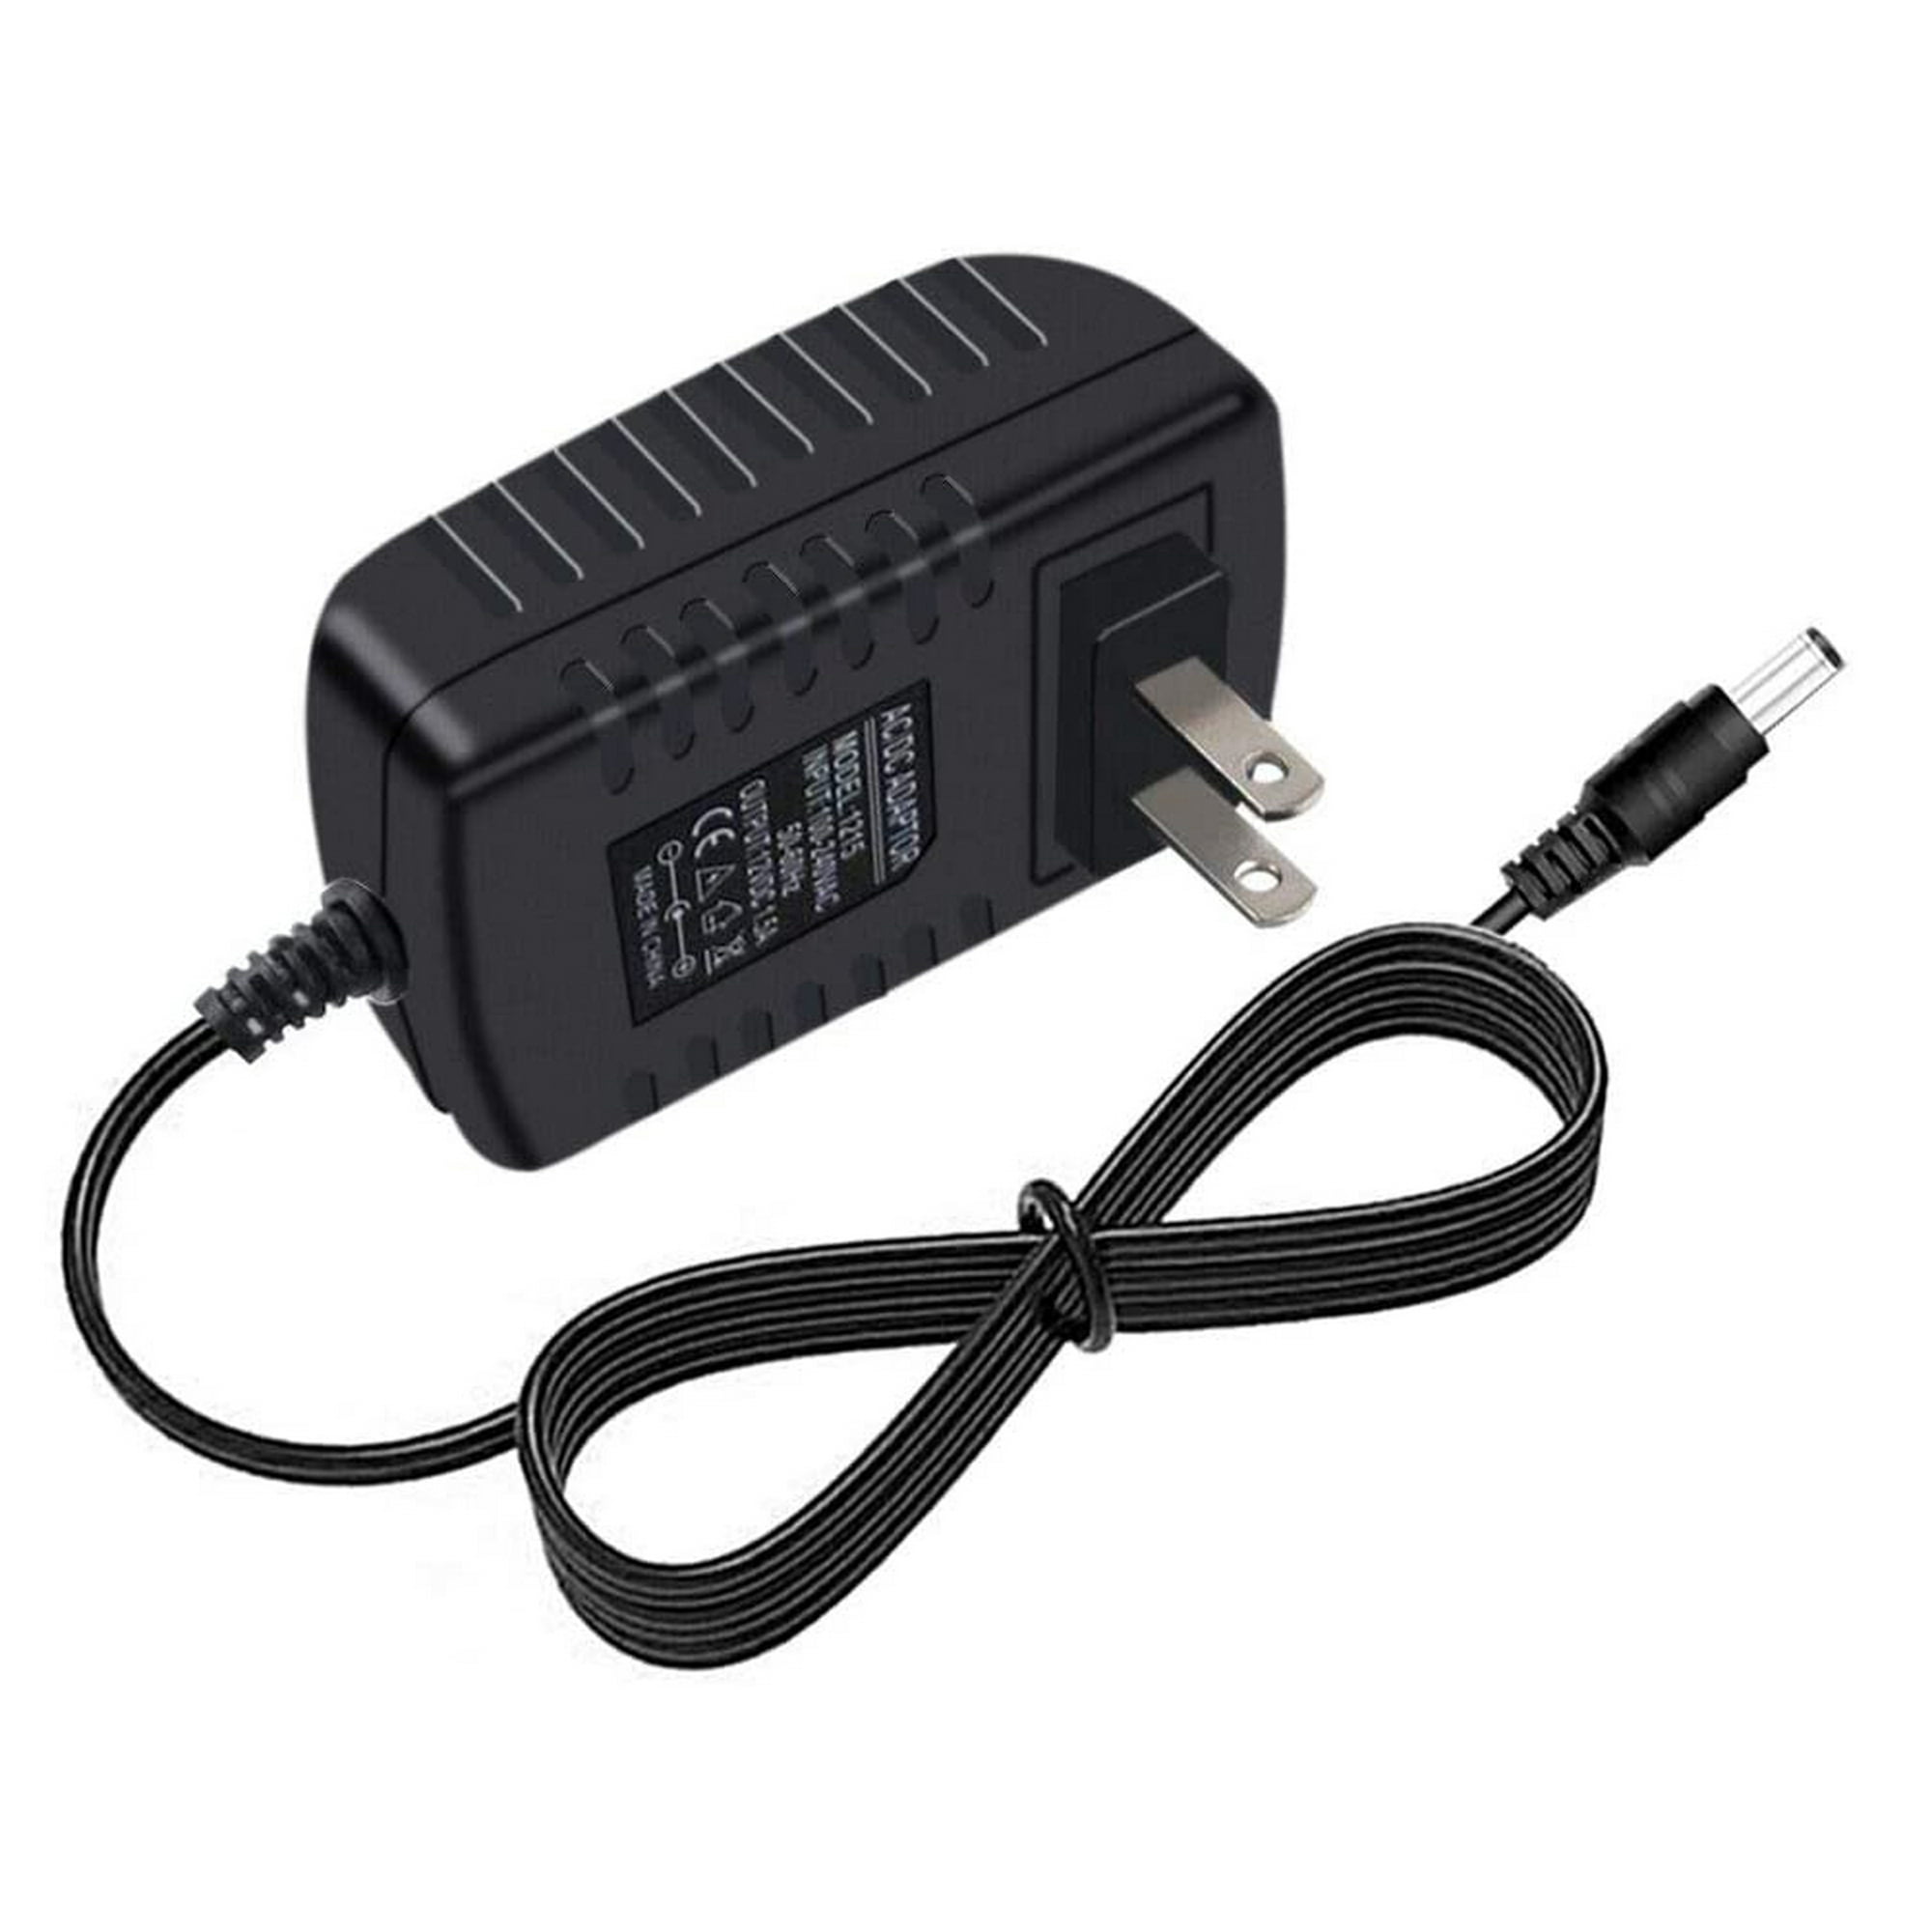 Premium AC/DC Switching Power Adapter With DC 12V Output - Walmart.com